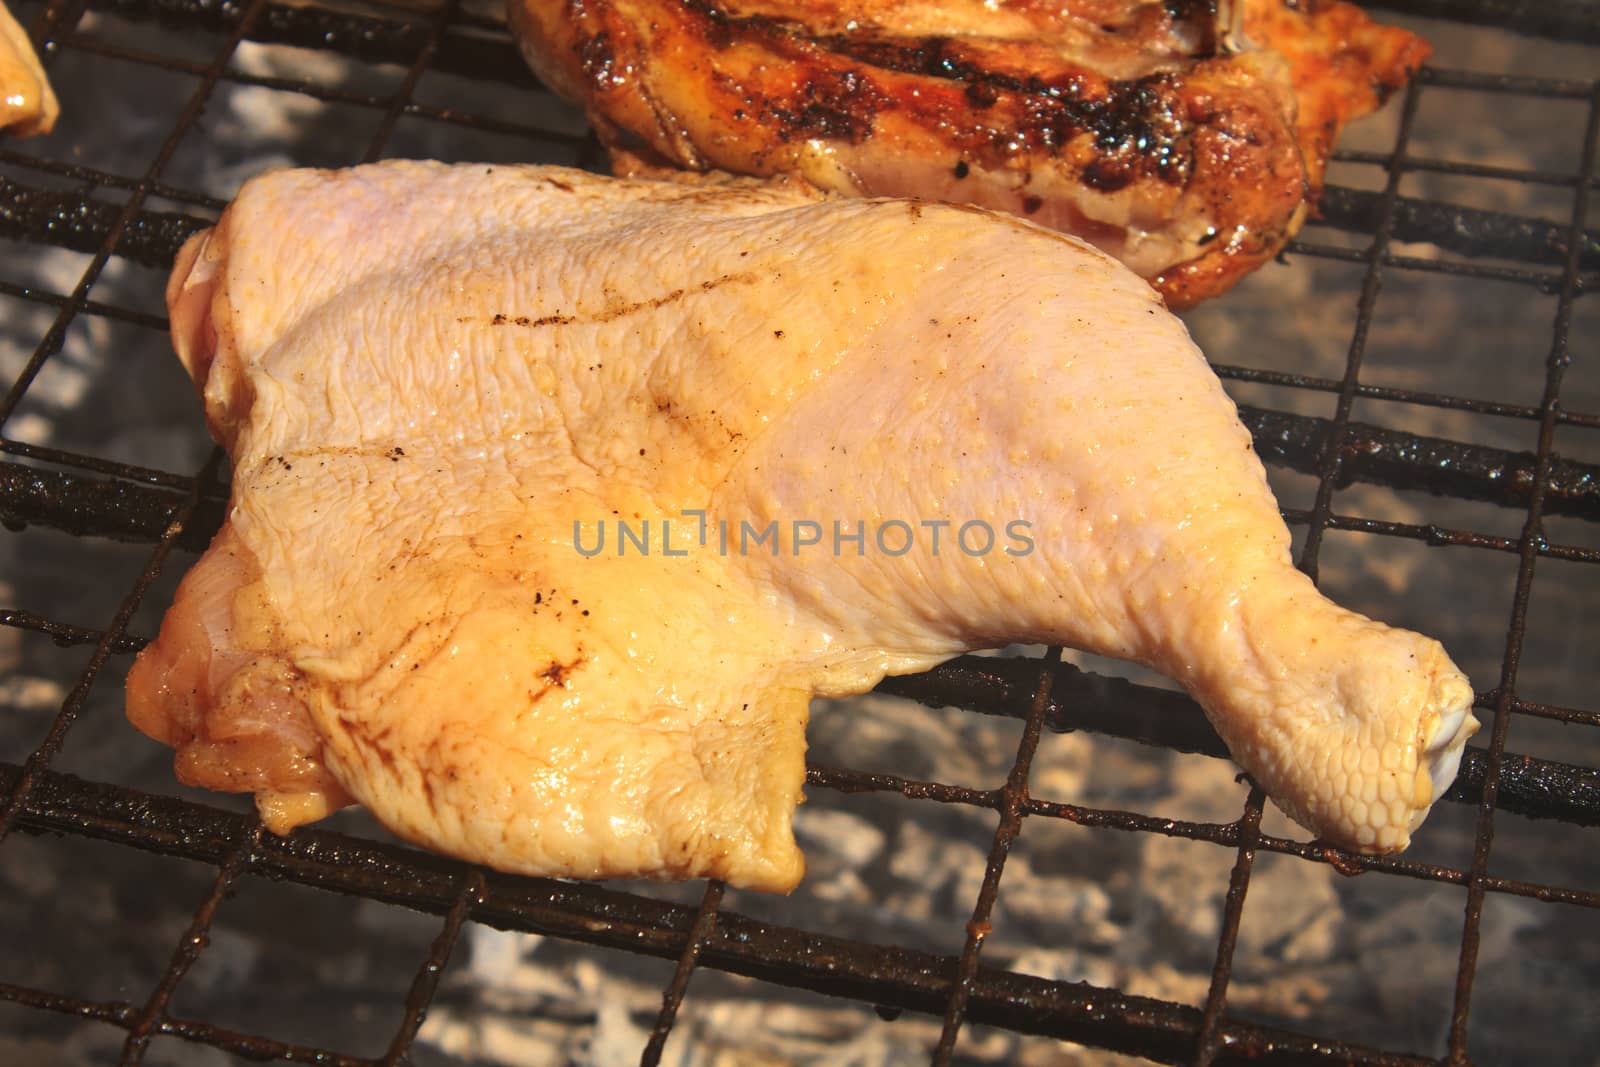 Grilled chicken thigh on the flaming grill